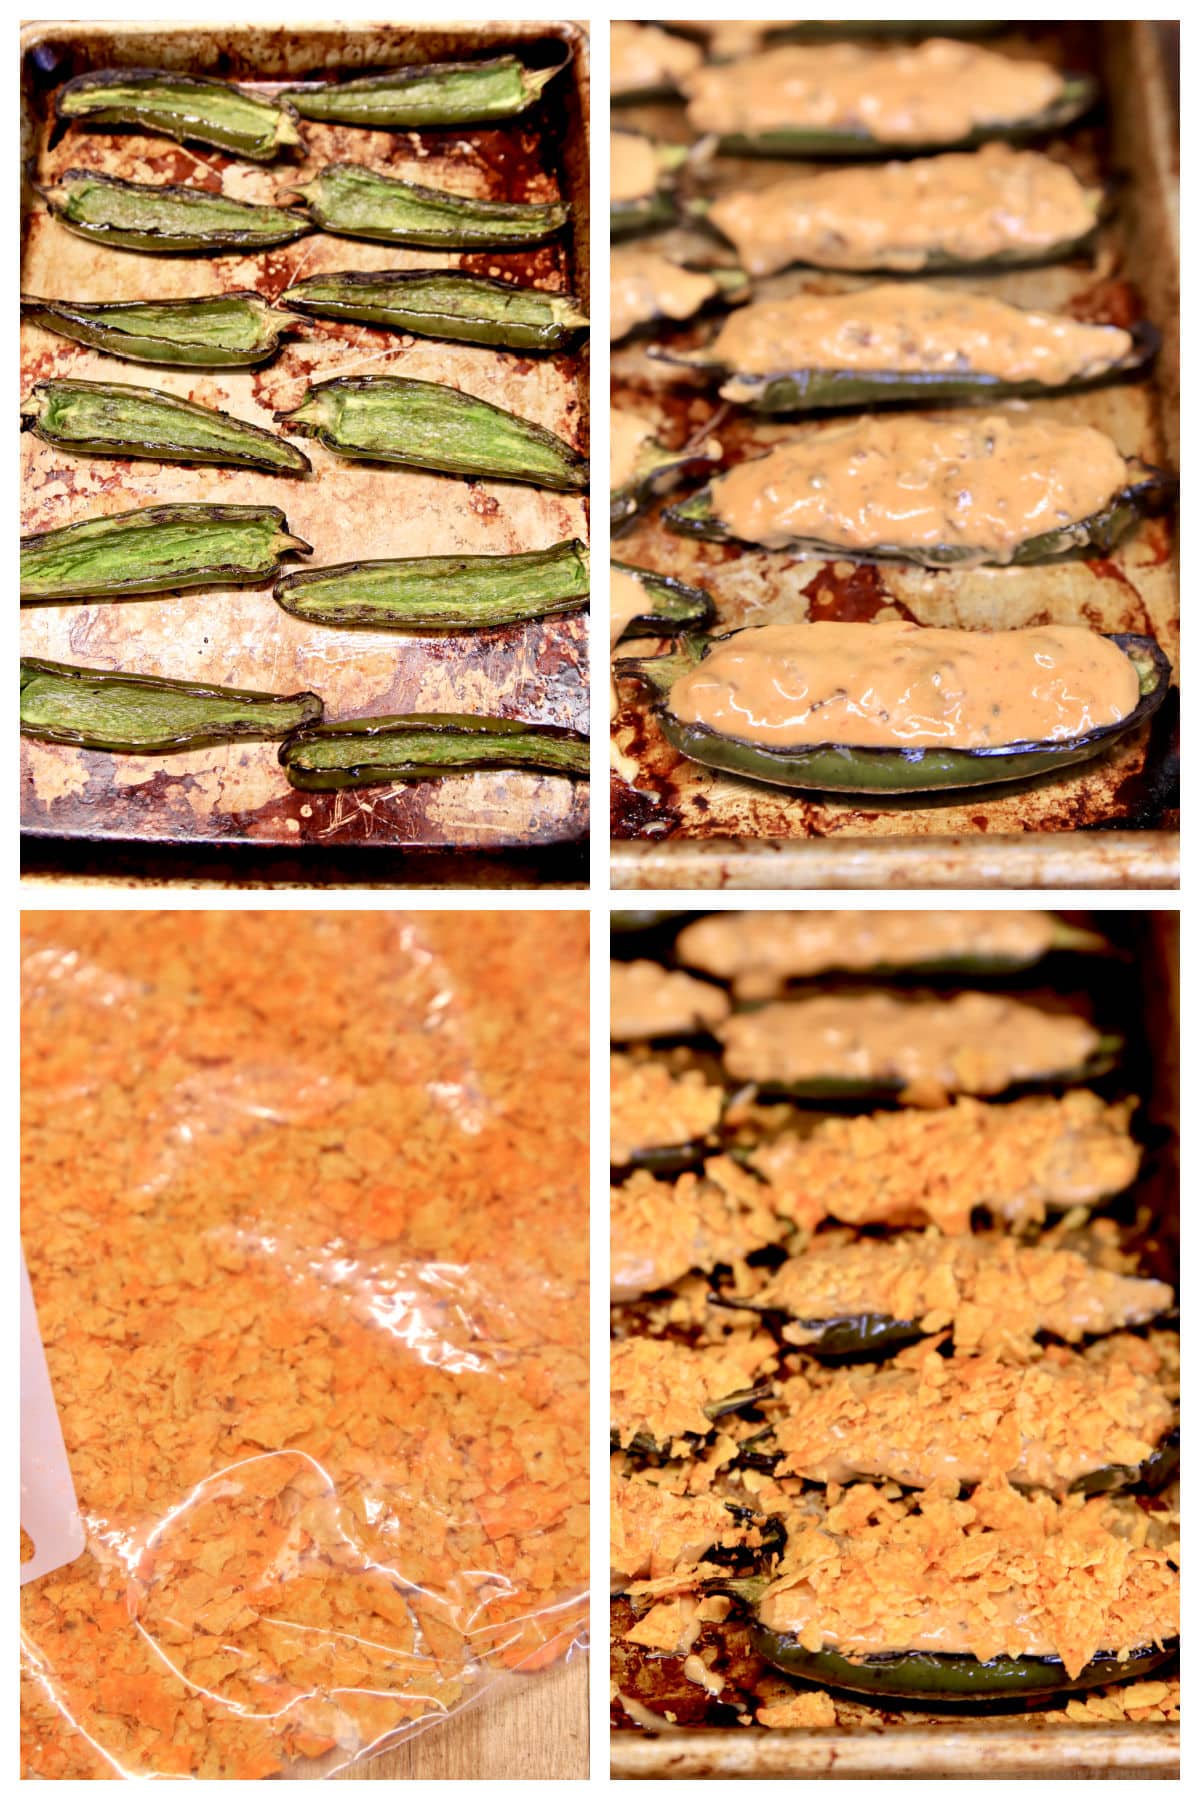 Collage stuffing jalapeno halves with queso and topping with crushed doritos.